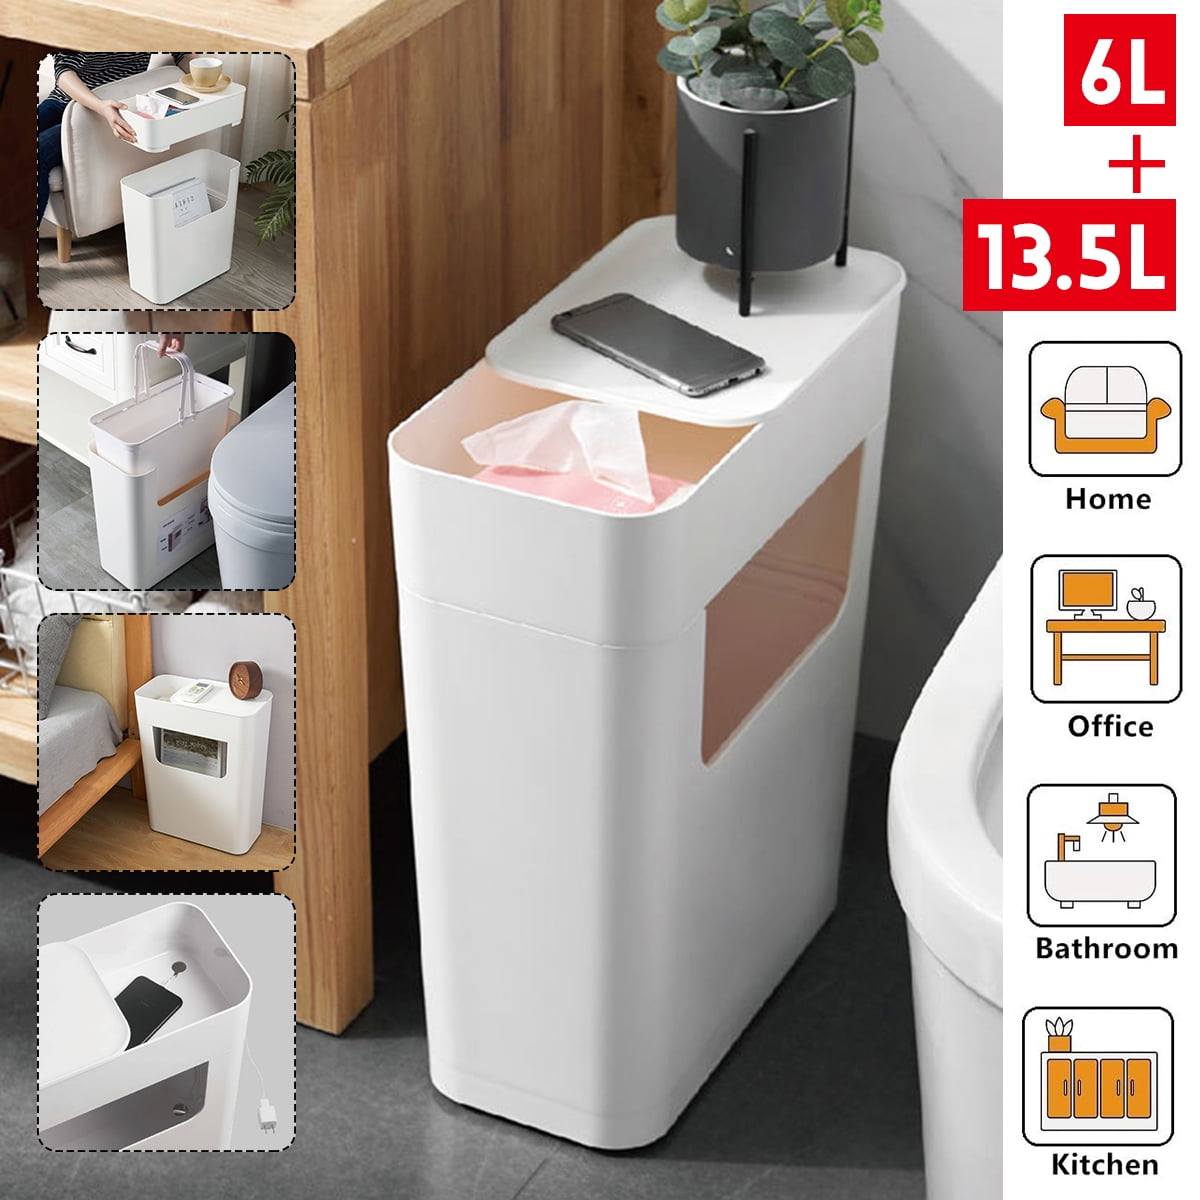 2 in 1Trash Can Garbage Bin 13.5L+3L Detachable 2Tiers Storage Organizer Box + 4 Wheels for Home Office Toilet Living Room, 19.3x13.7x8.7inch